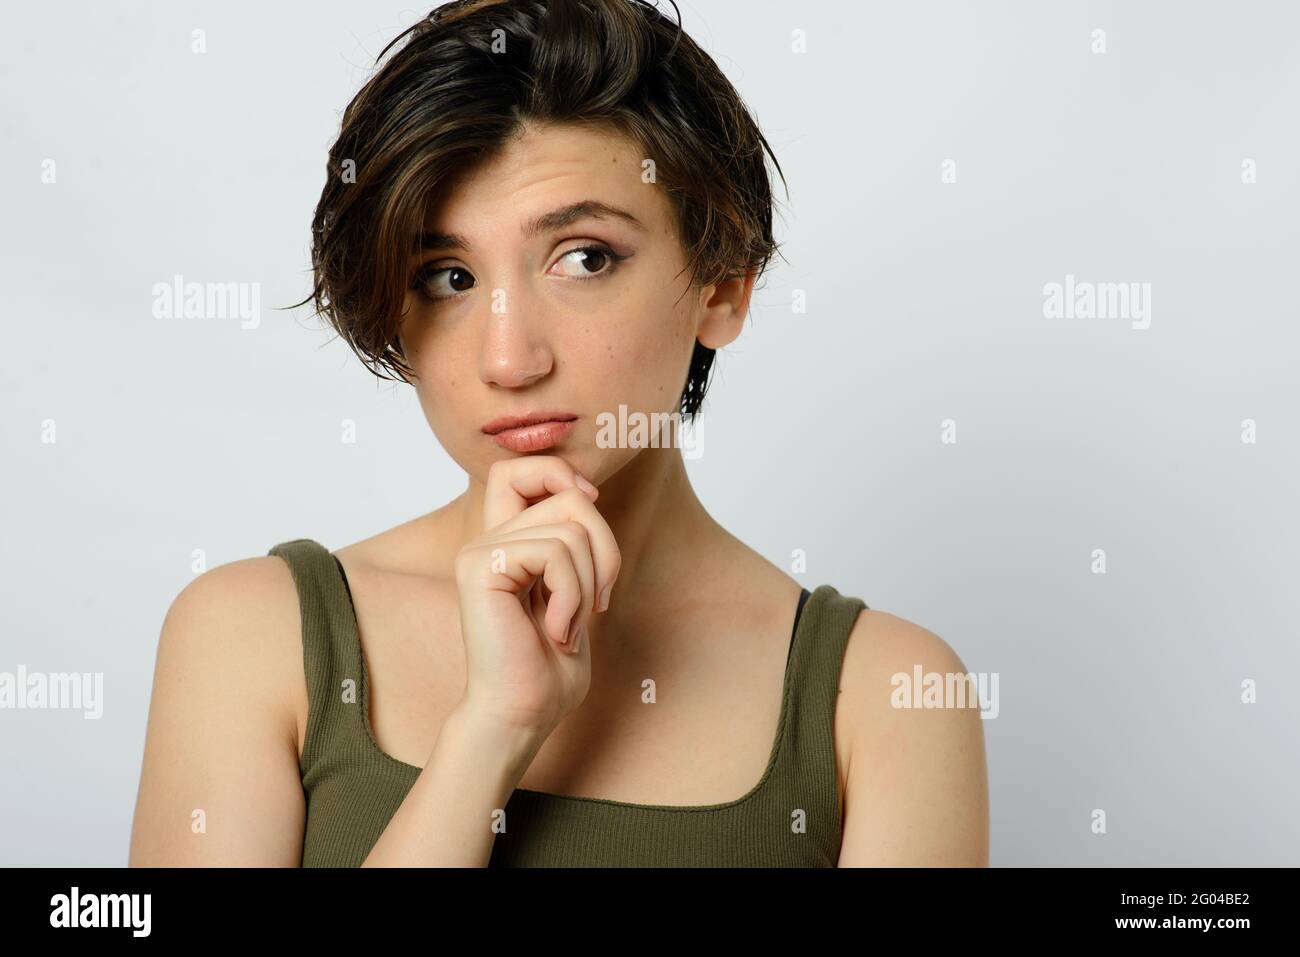 Portrait of a young woman with short and wet hair and a thoughtful emotion on her face on a white background. Stock Photo